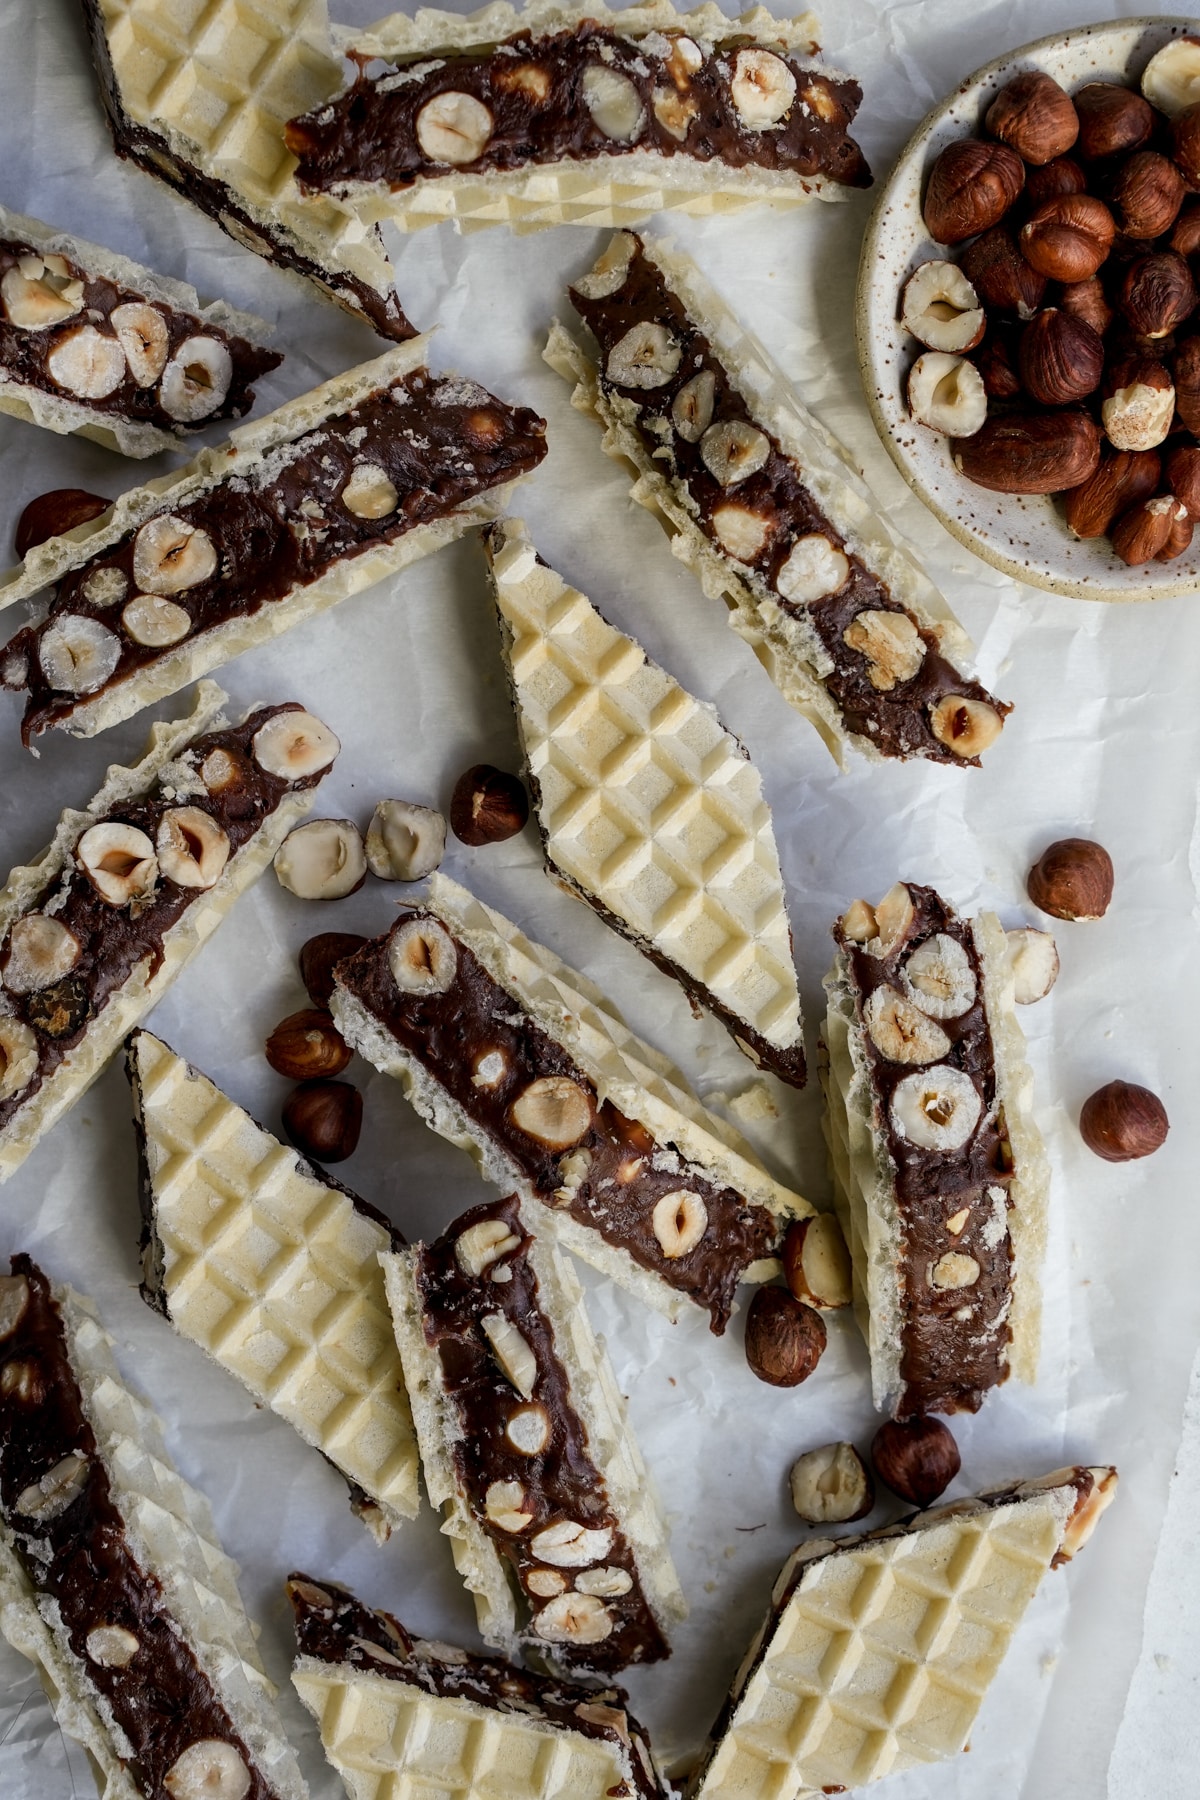 Marshmallow torrone on parchment paper with a small bowl of hazelnuts to the side